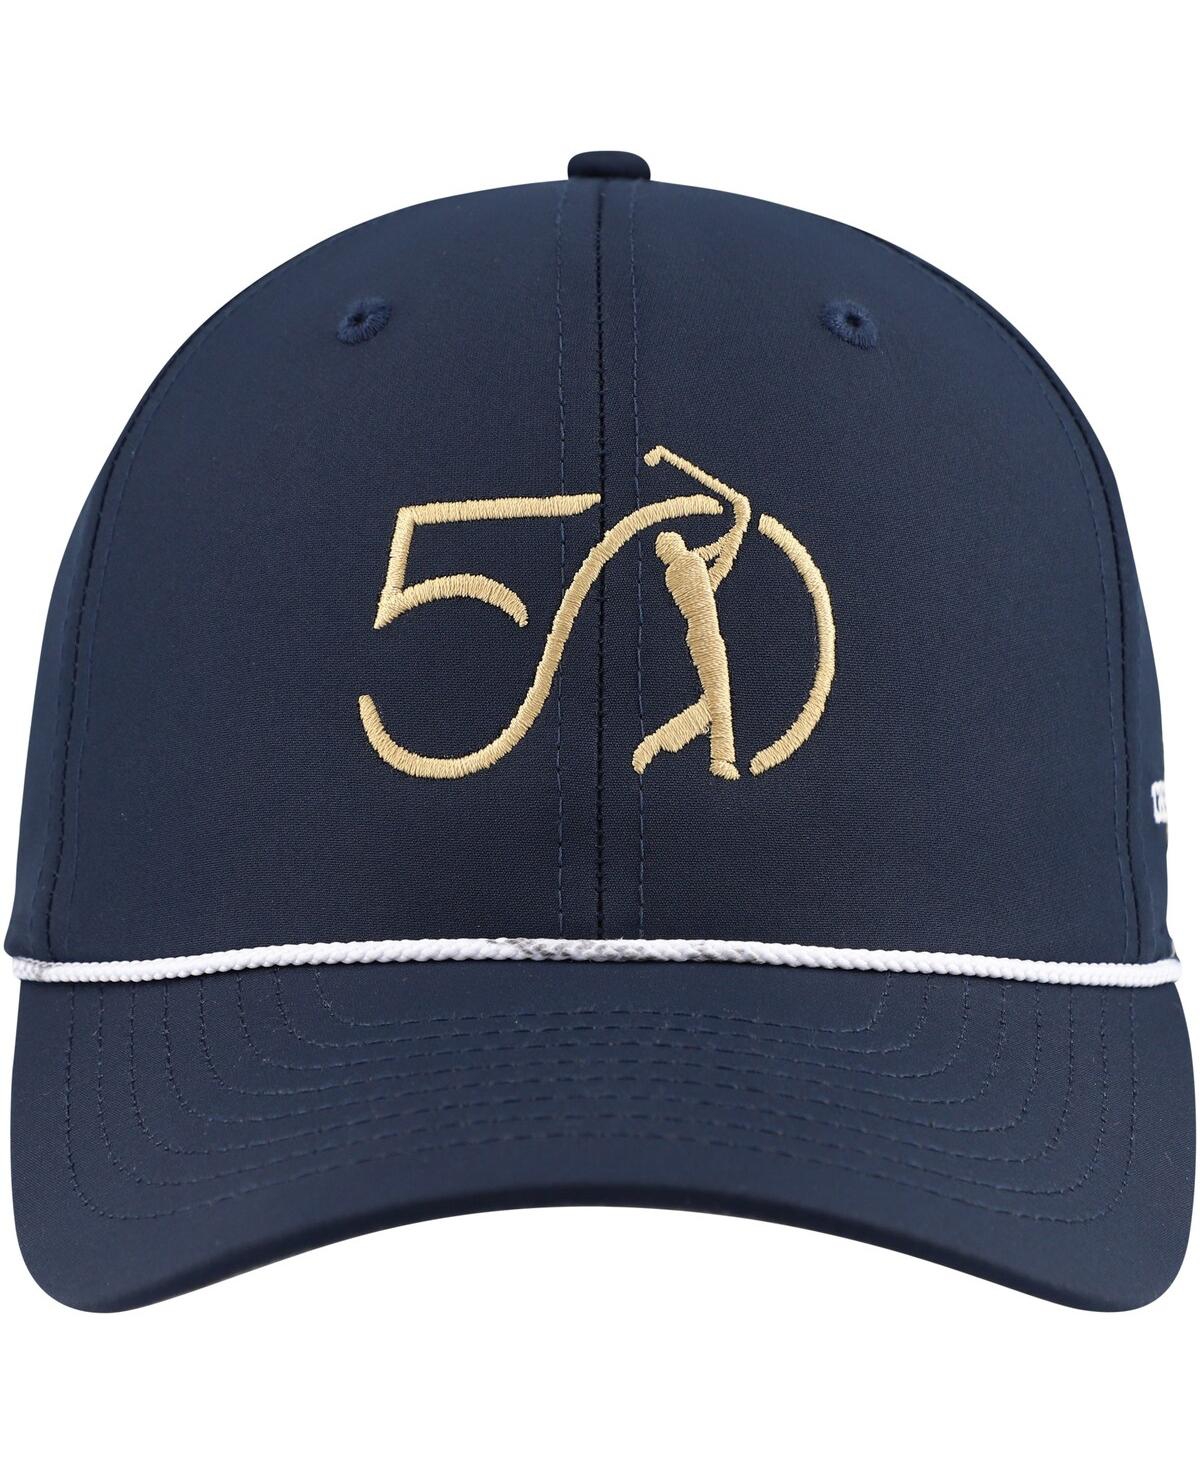 Shop Imperial Men's Navy The Players 50th Anniversary The Wingman Rope Adjustable Hat